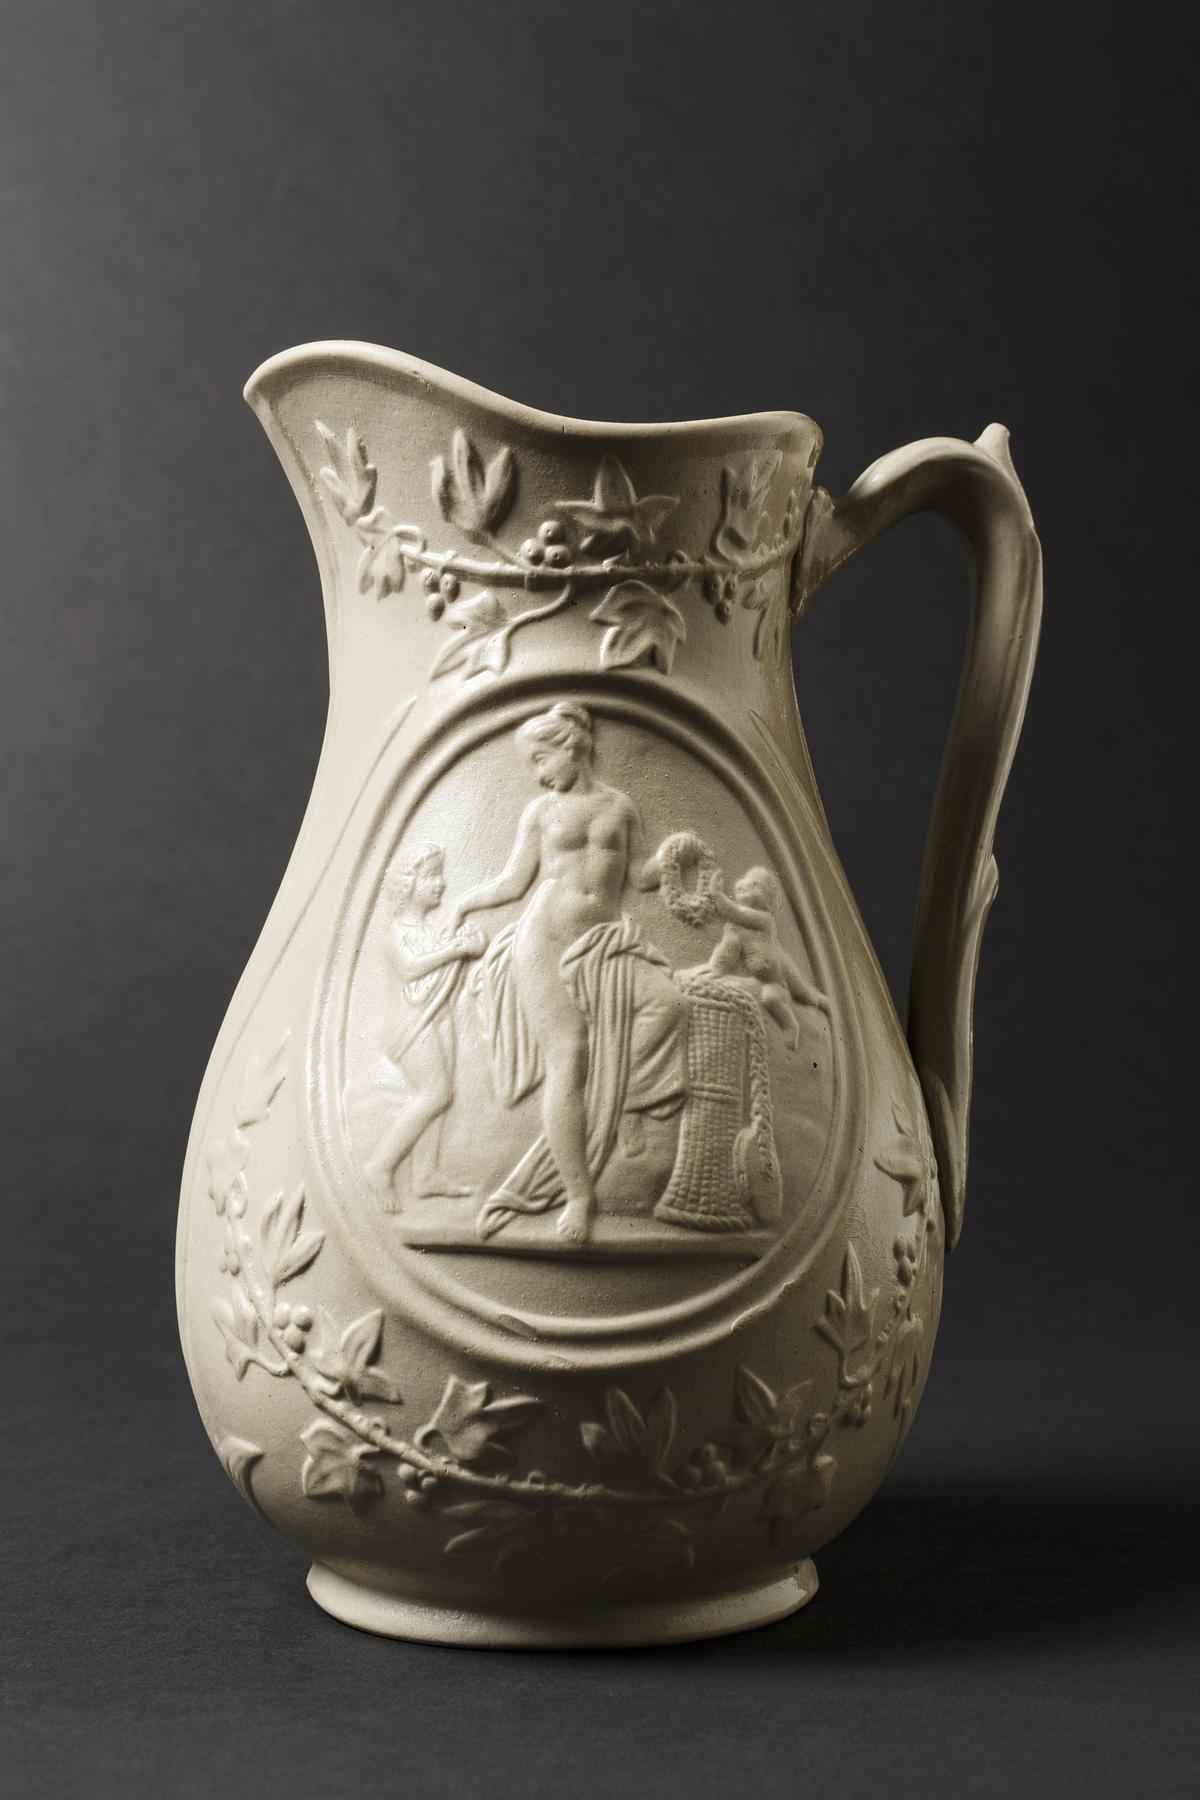 Pot with small representations of A642 and A643, G367